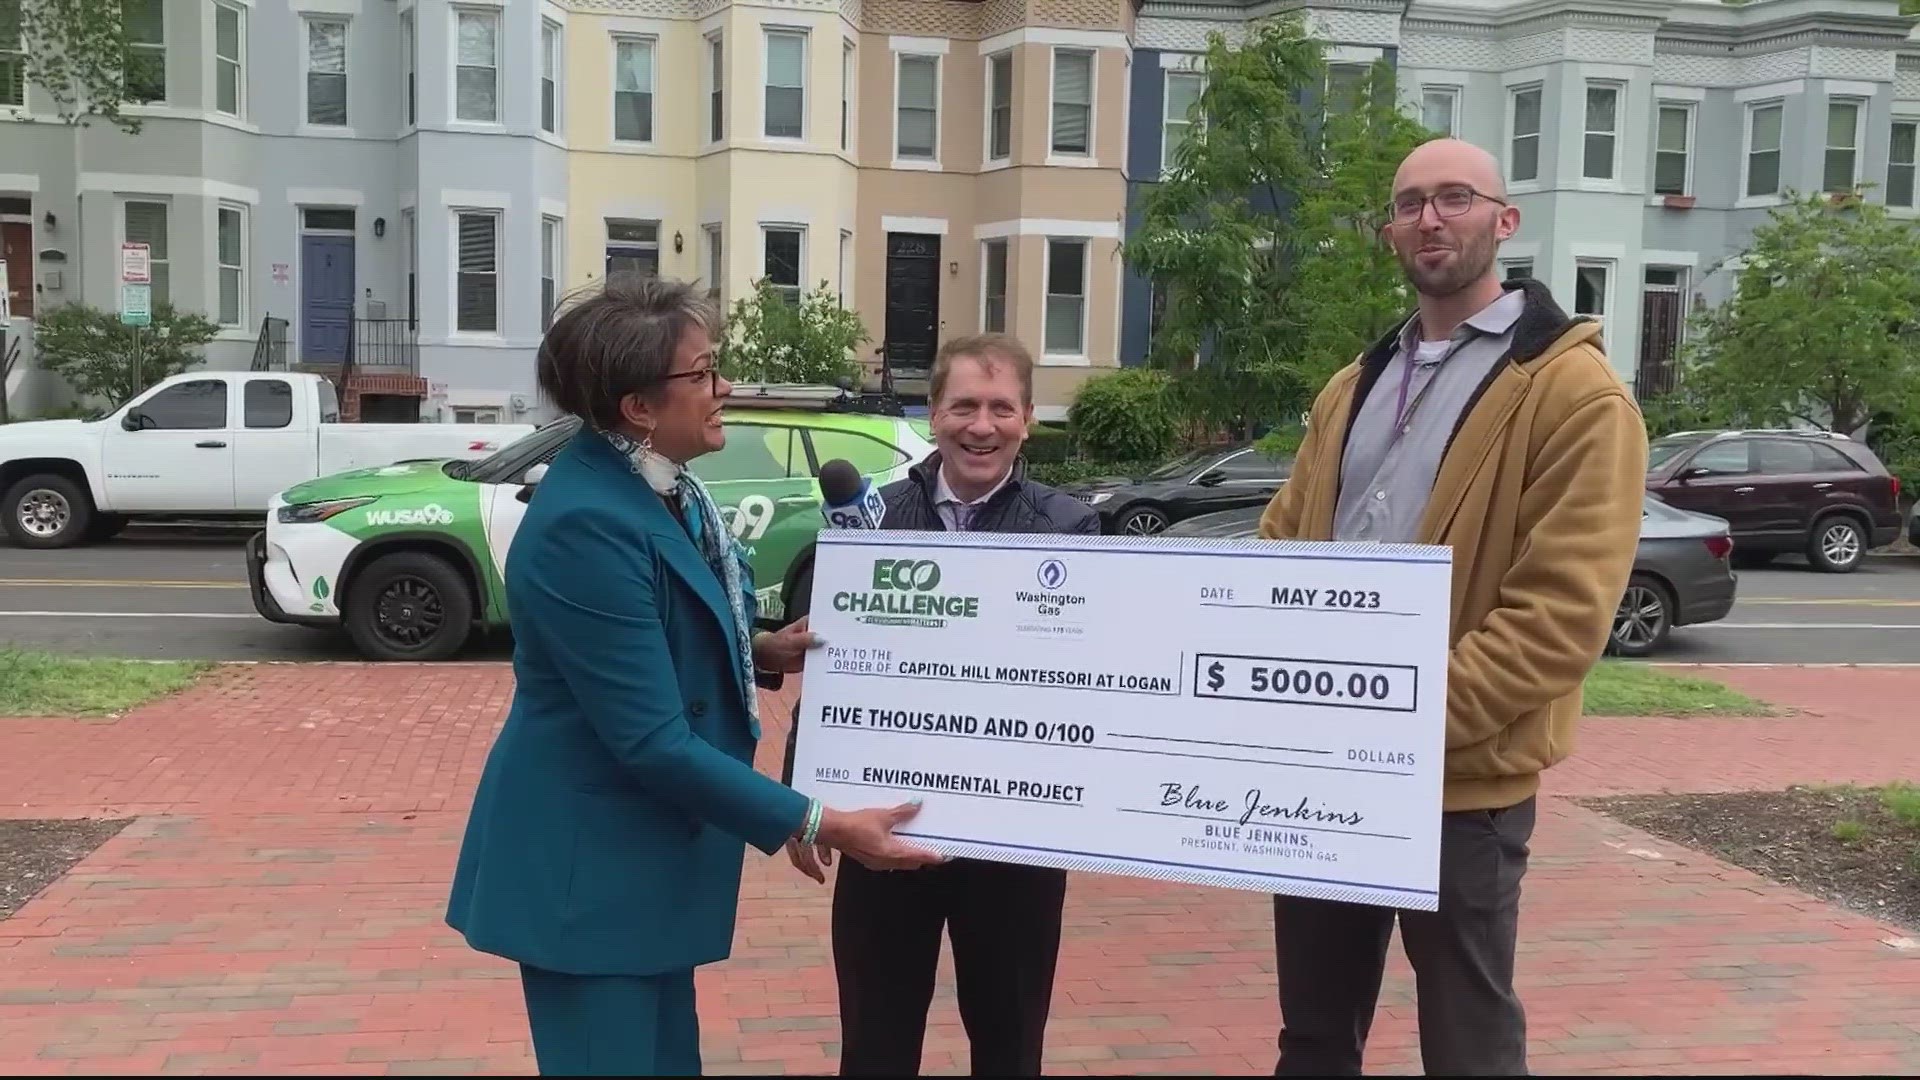 Each winner gets $5,000 from Washington Gas to make their project a reality.